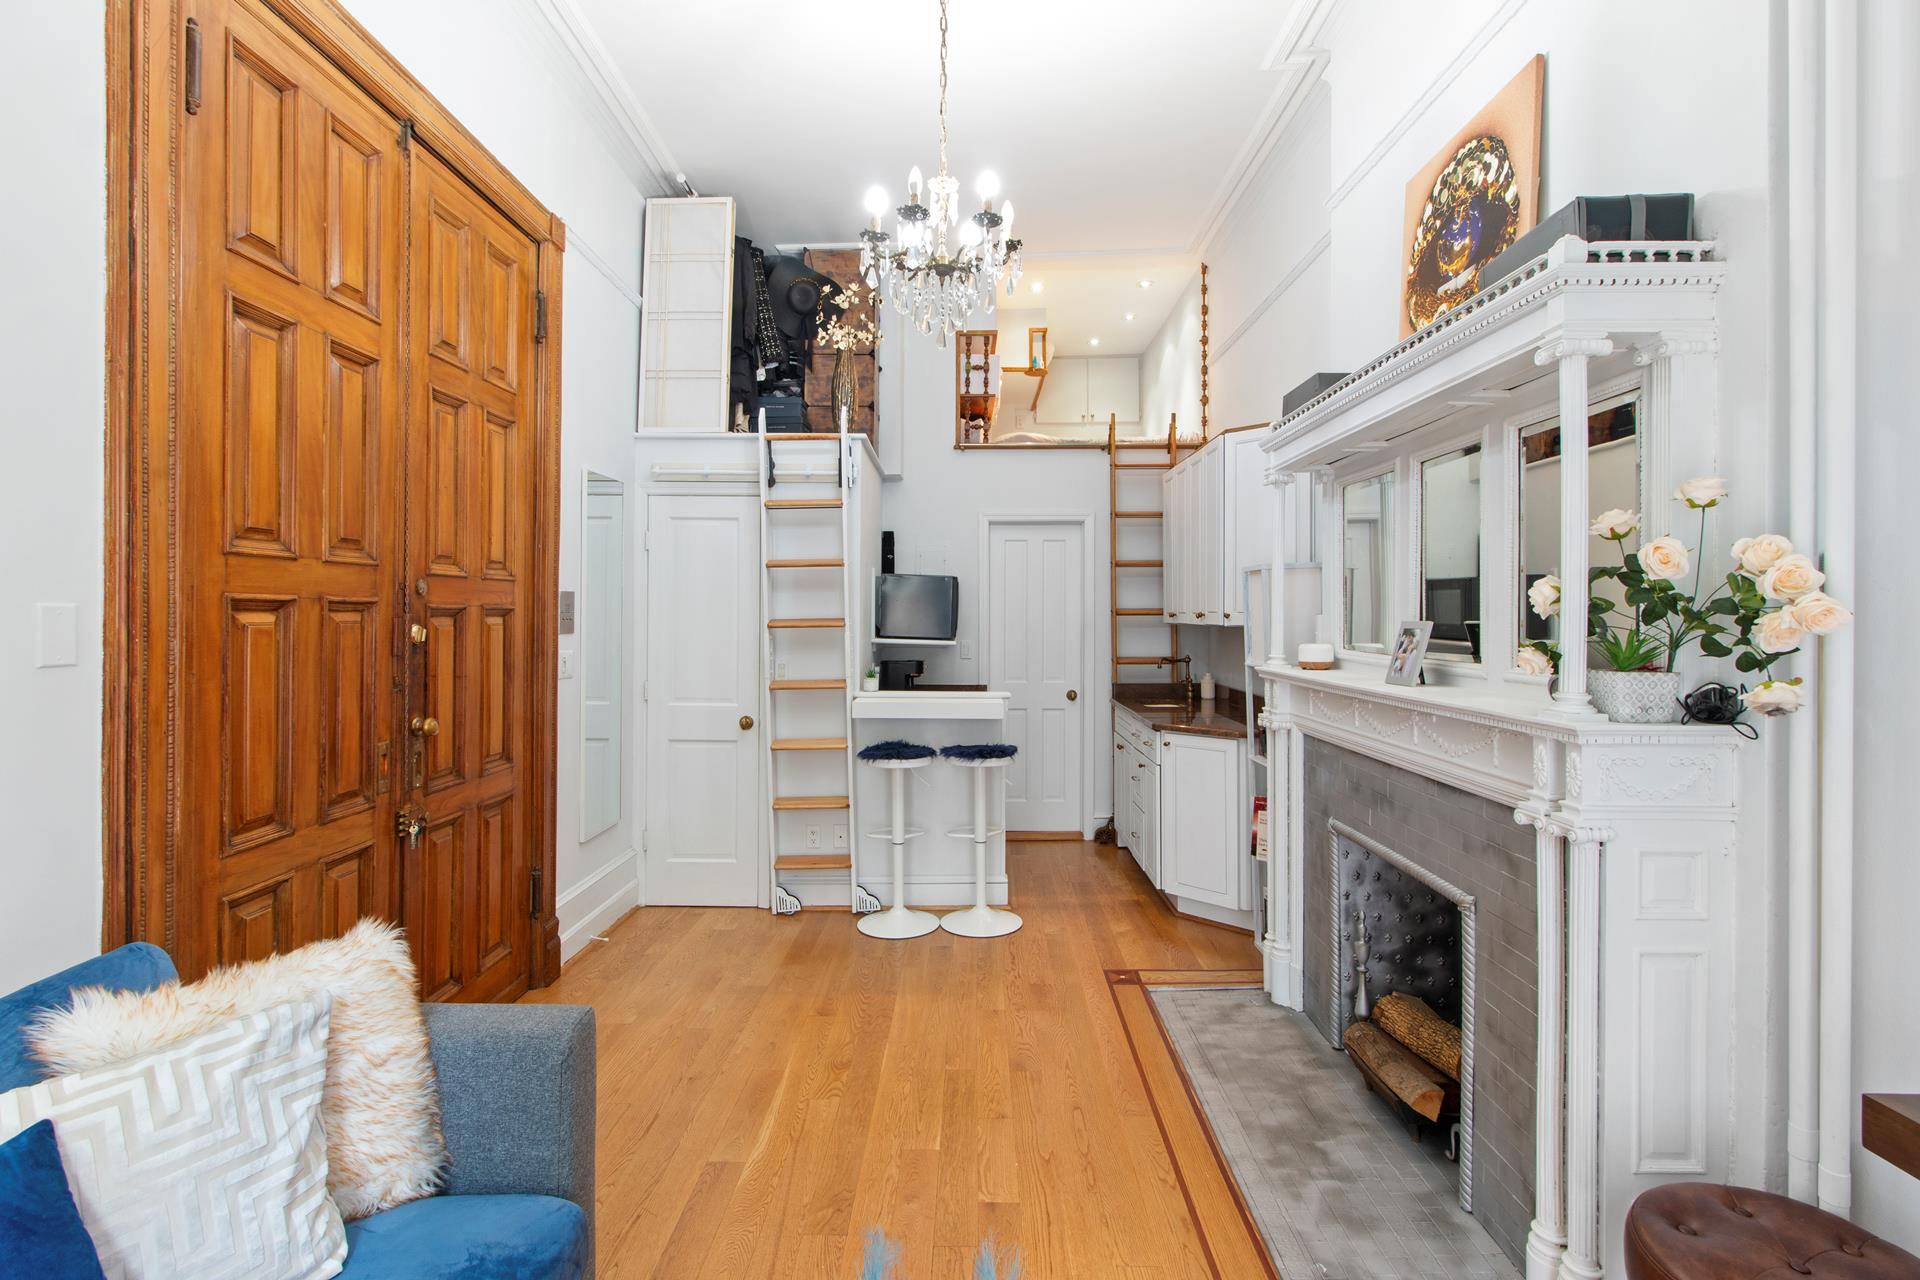 DESCRIPTIONOn a picturesque tree lined street in the Upper West Side, this front facing studio in a well maintained pre war brownstone is a true gem.